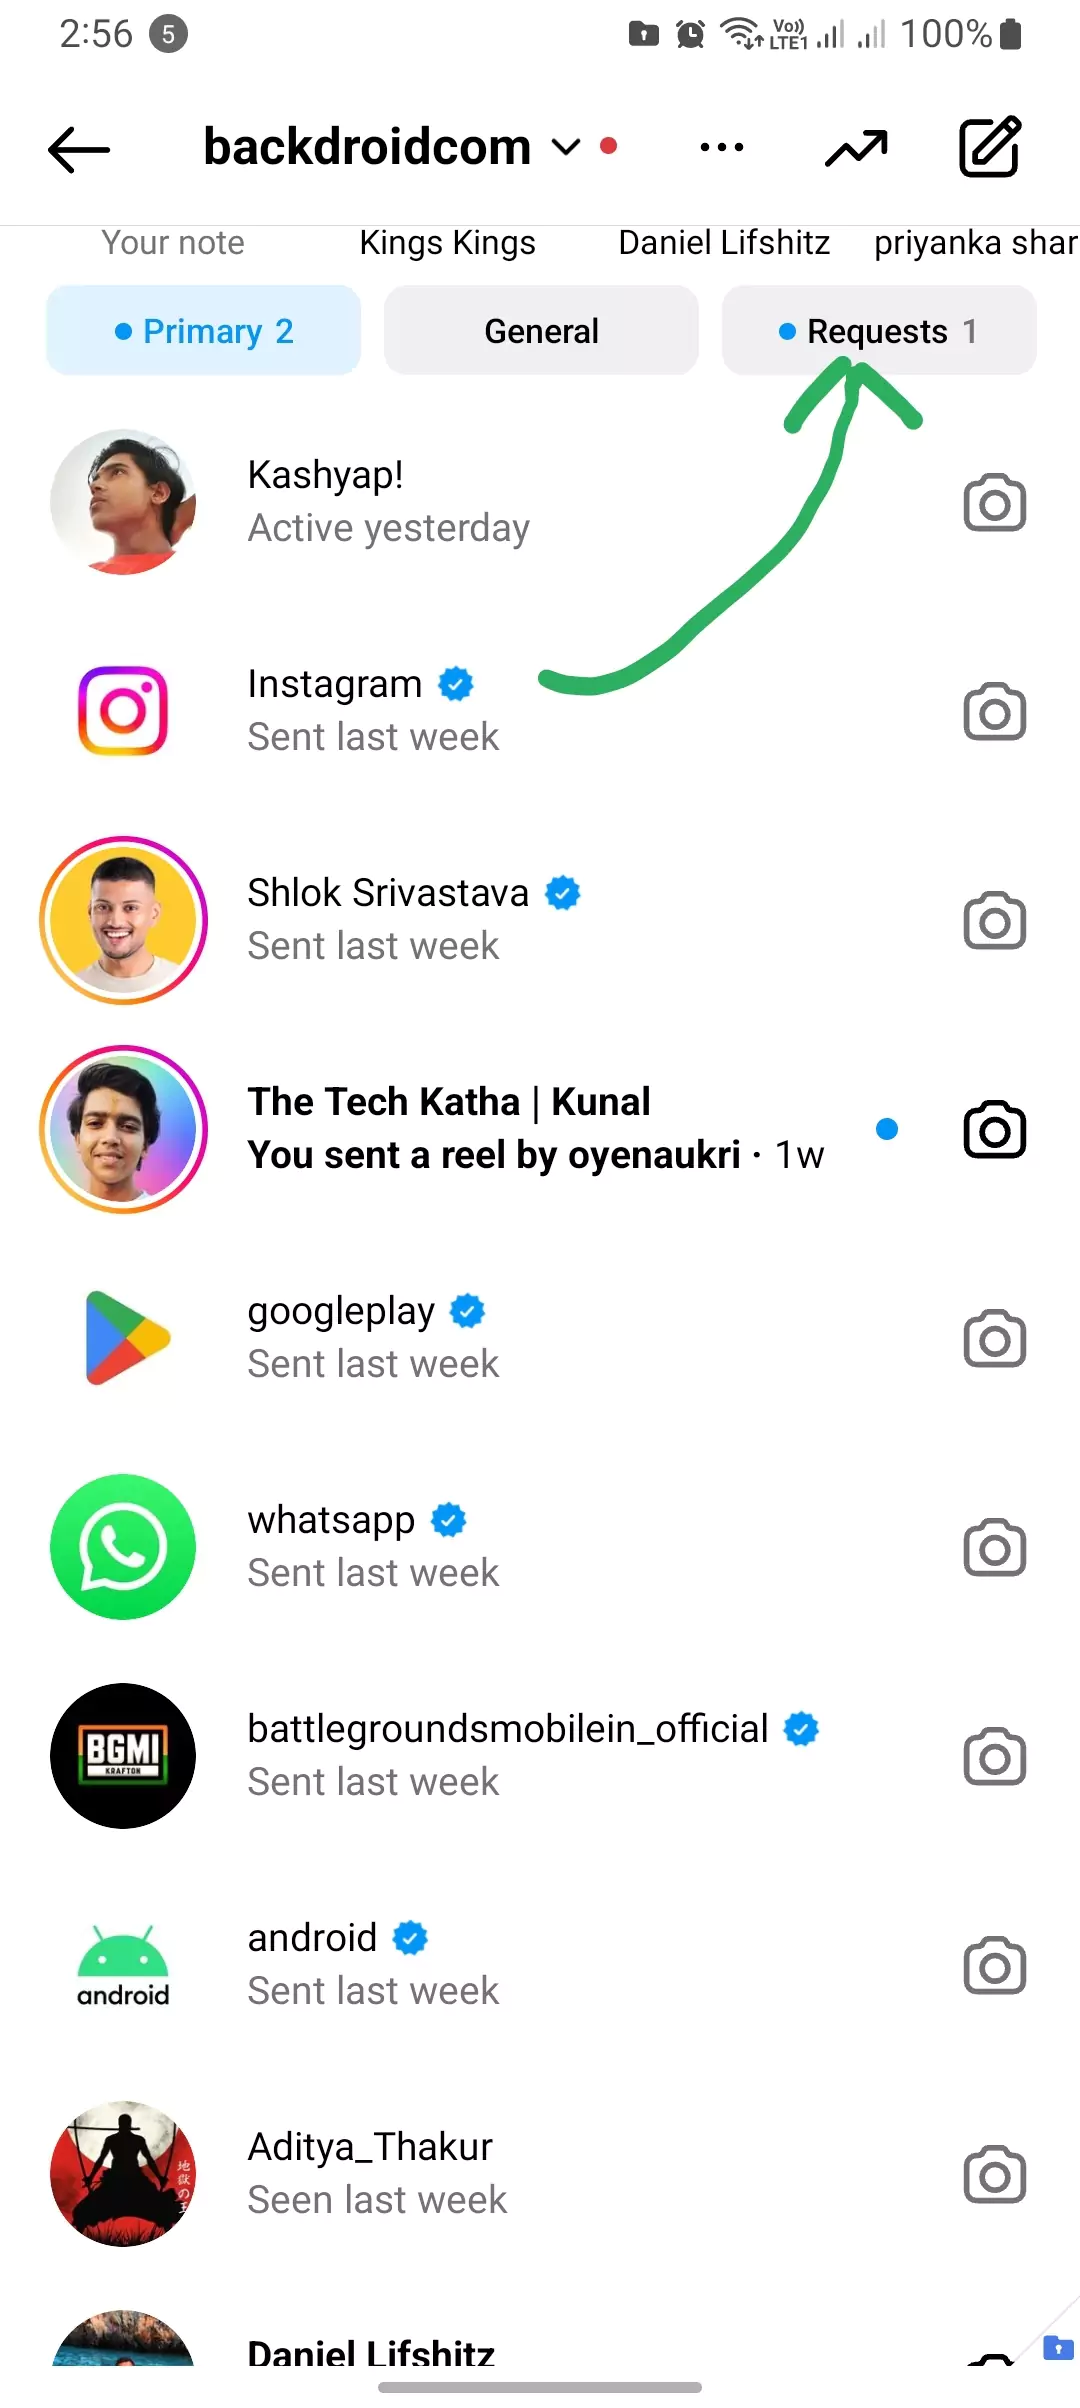 instagram requests tab for restricted texts received on instgaram